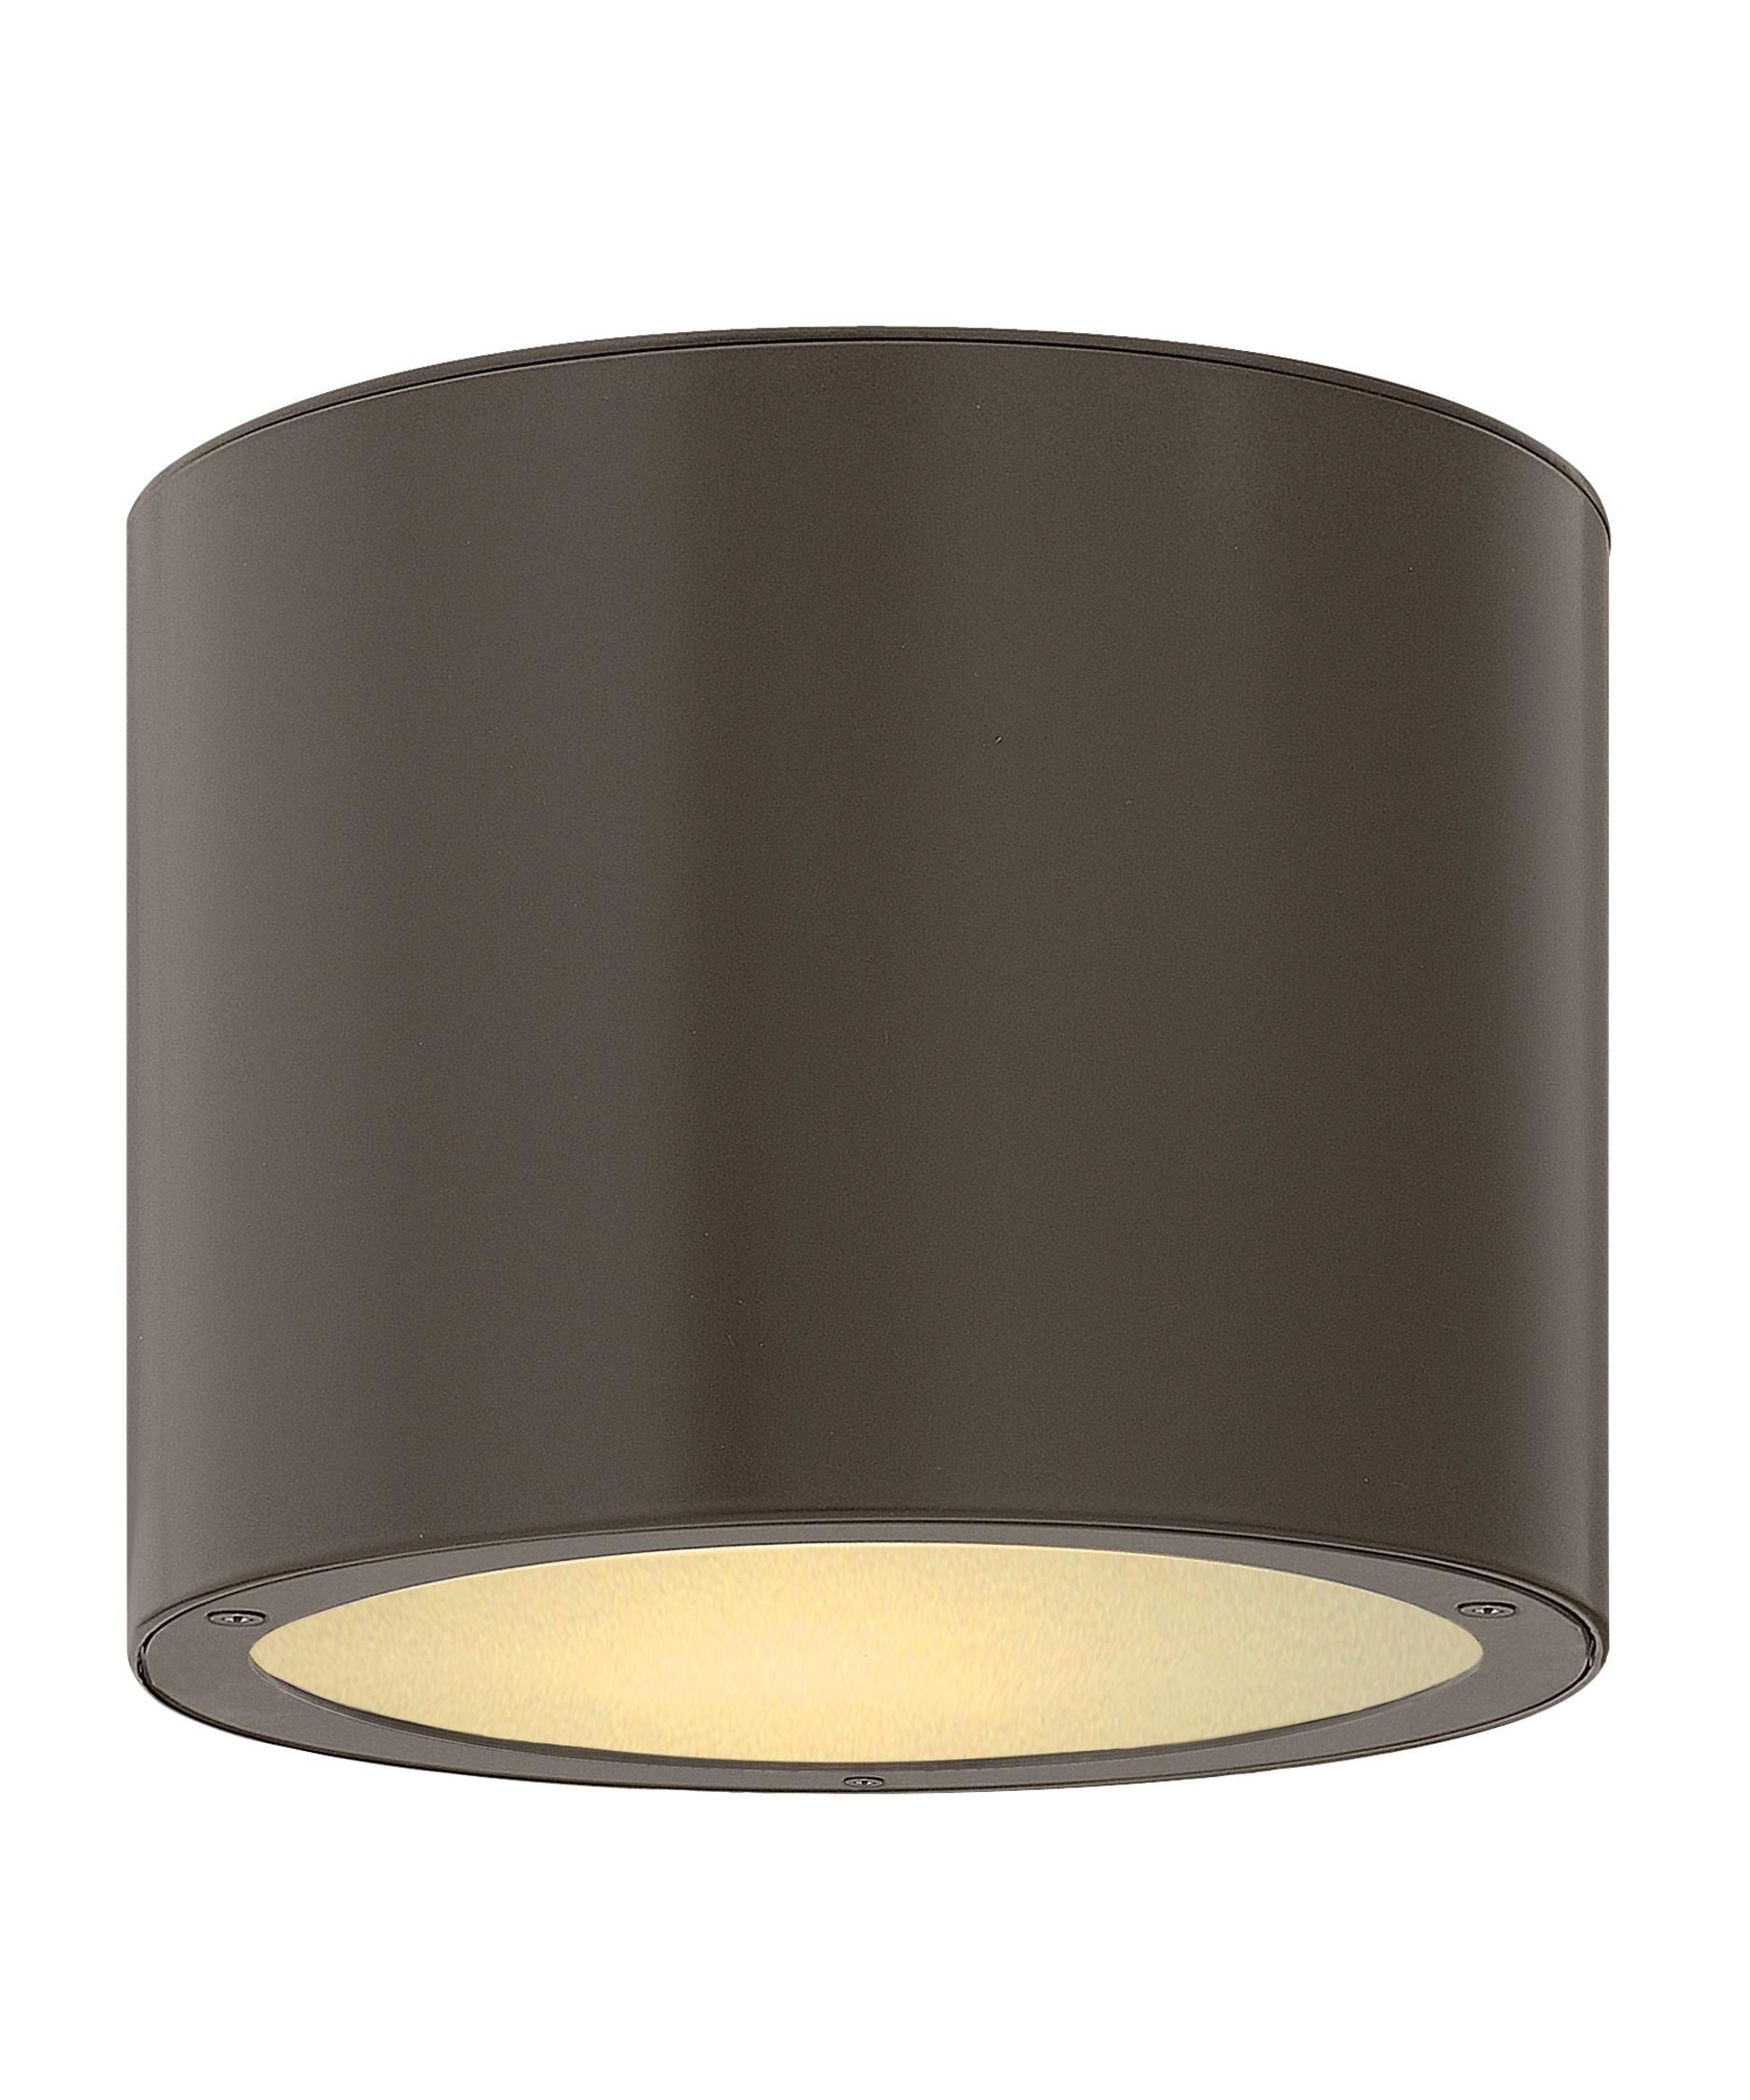 Hinkley Lighting 1663 Luna 8 Inch Wide 1 Light Outdoor Flush Mount Intended For Unique Outdoor Ceiling Lights (View 5 of 15)